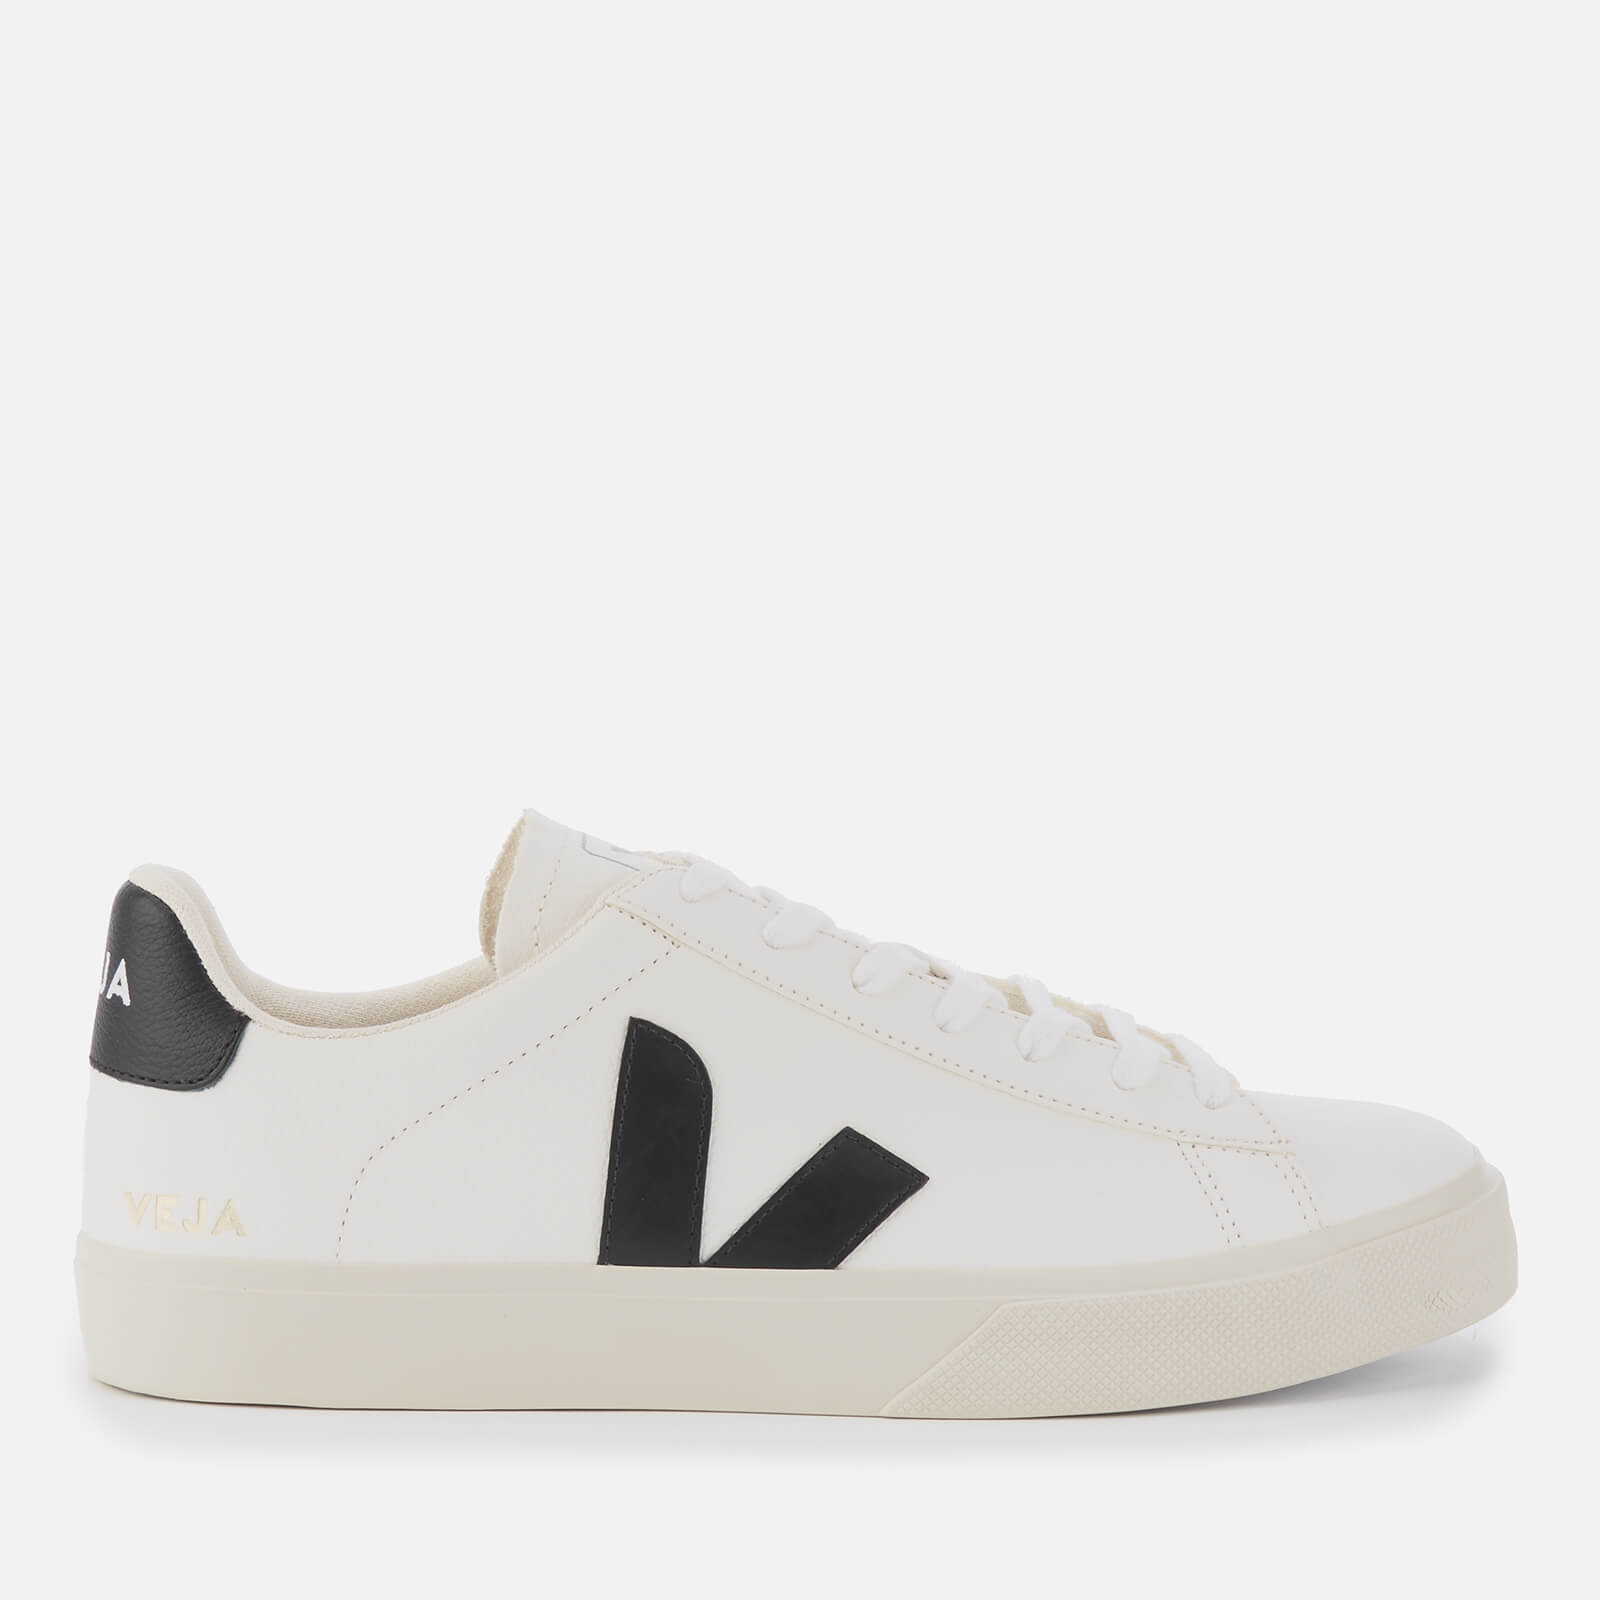 Veja Men's Campo Chrome Free Leather Trainers - Extra White/Black | Allsole